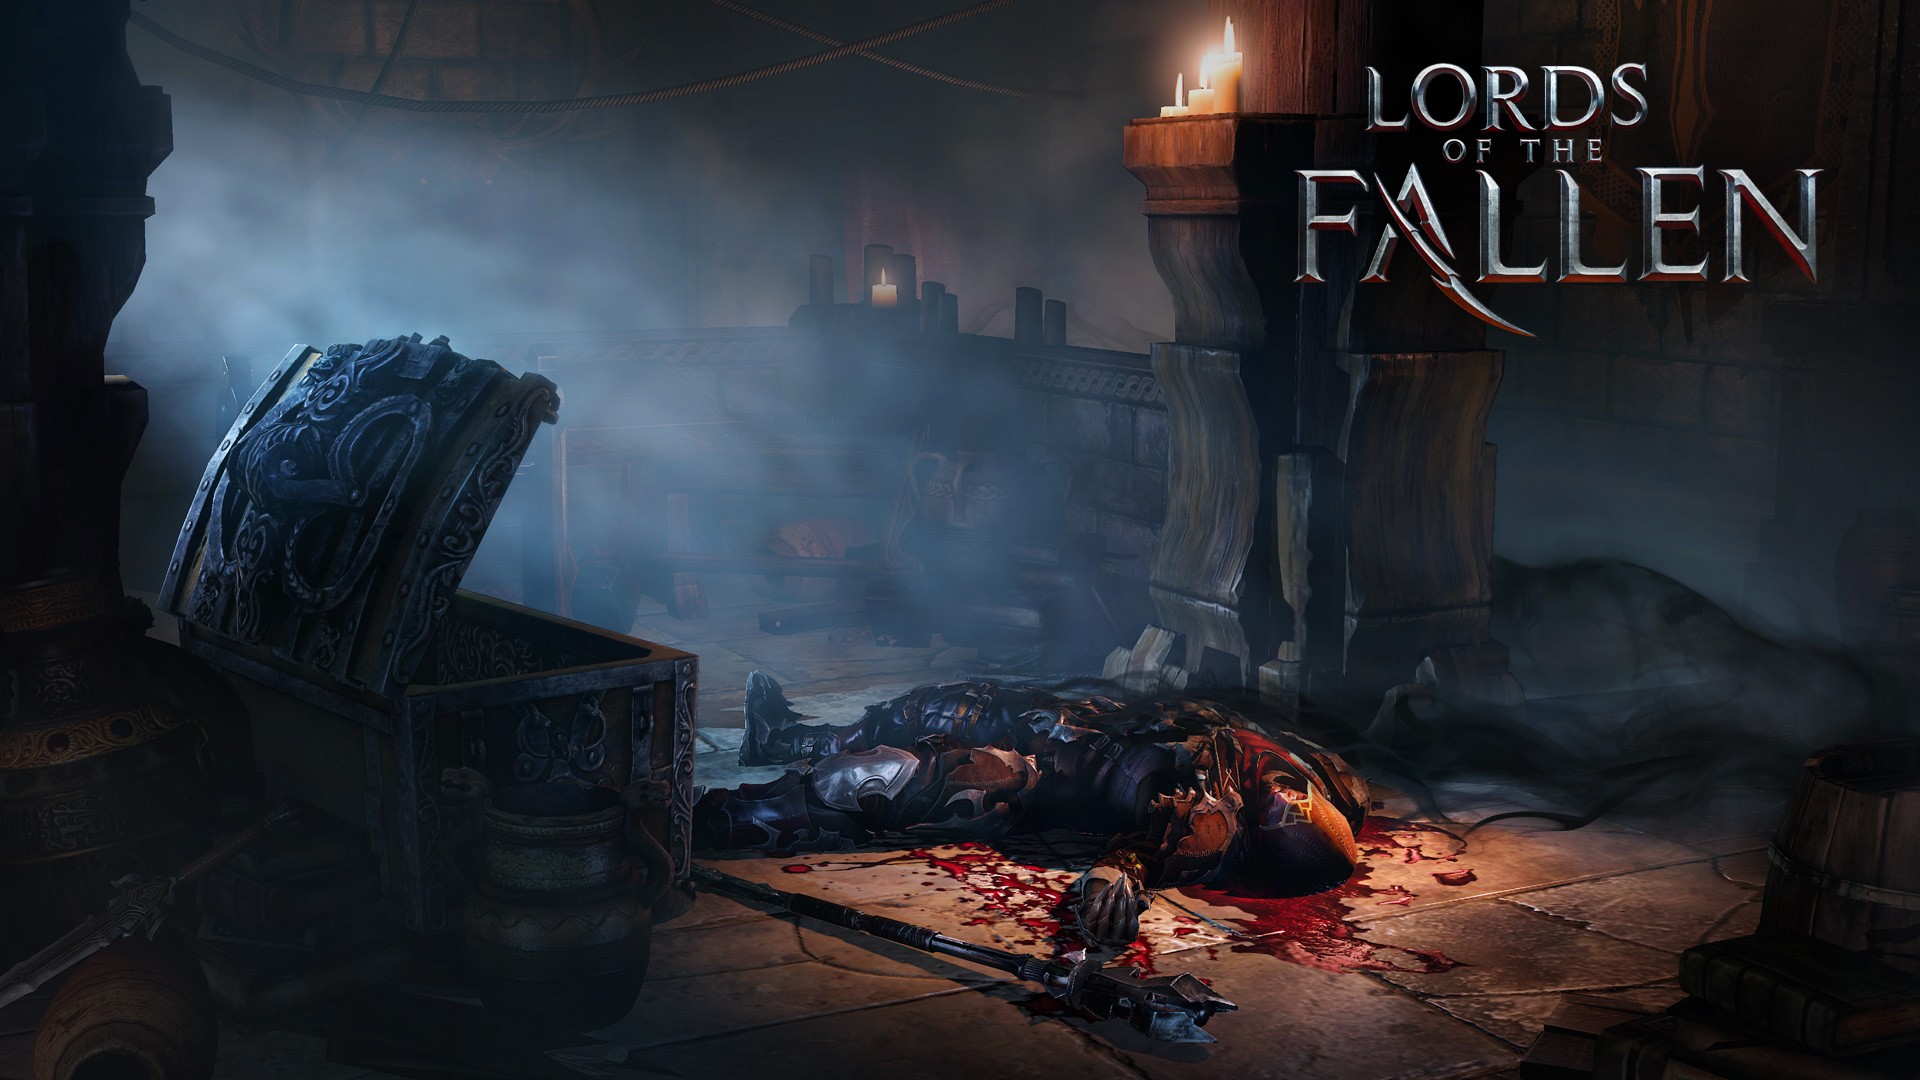    Lords of the Fallen